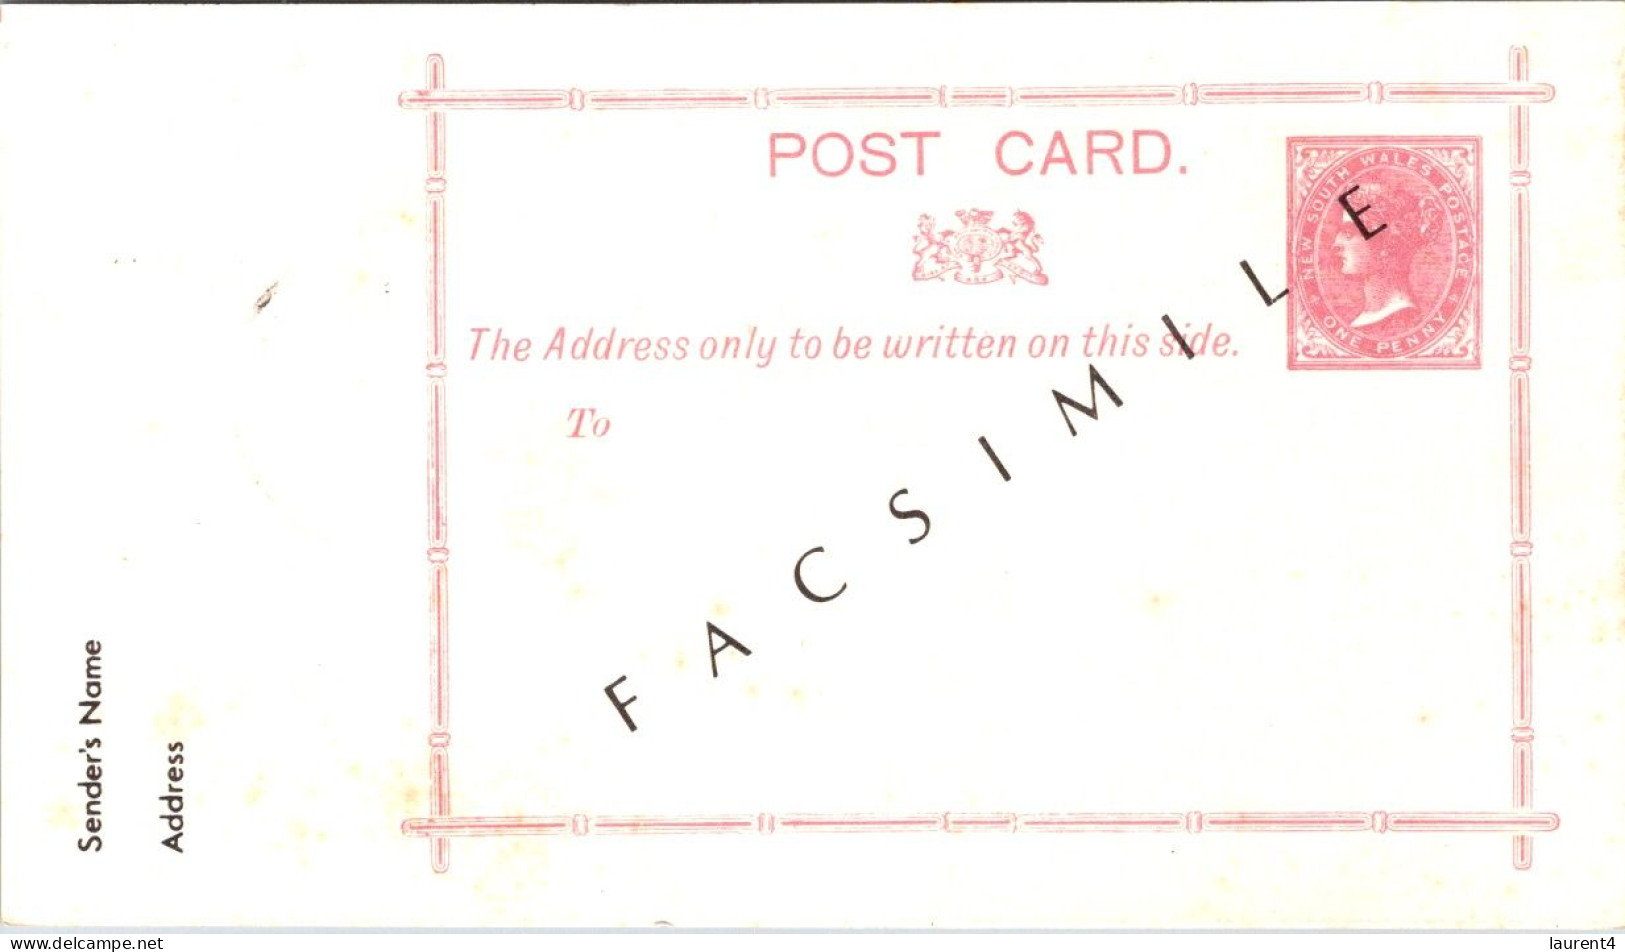 (4 P 29) Centanary Of The First Post Card Issued In NSW - 1st October 1875 (postmark 1st October 1975) - Poste & Facteurs